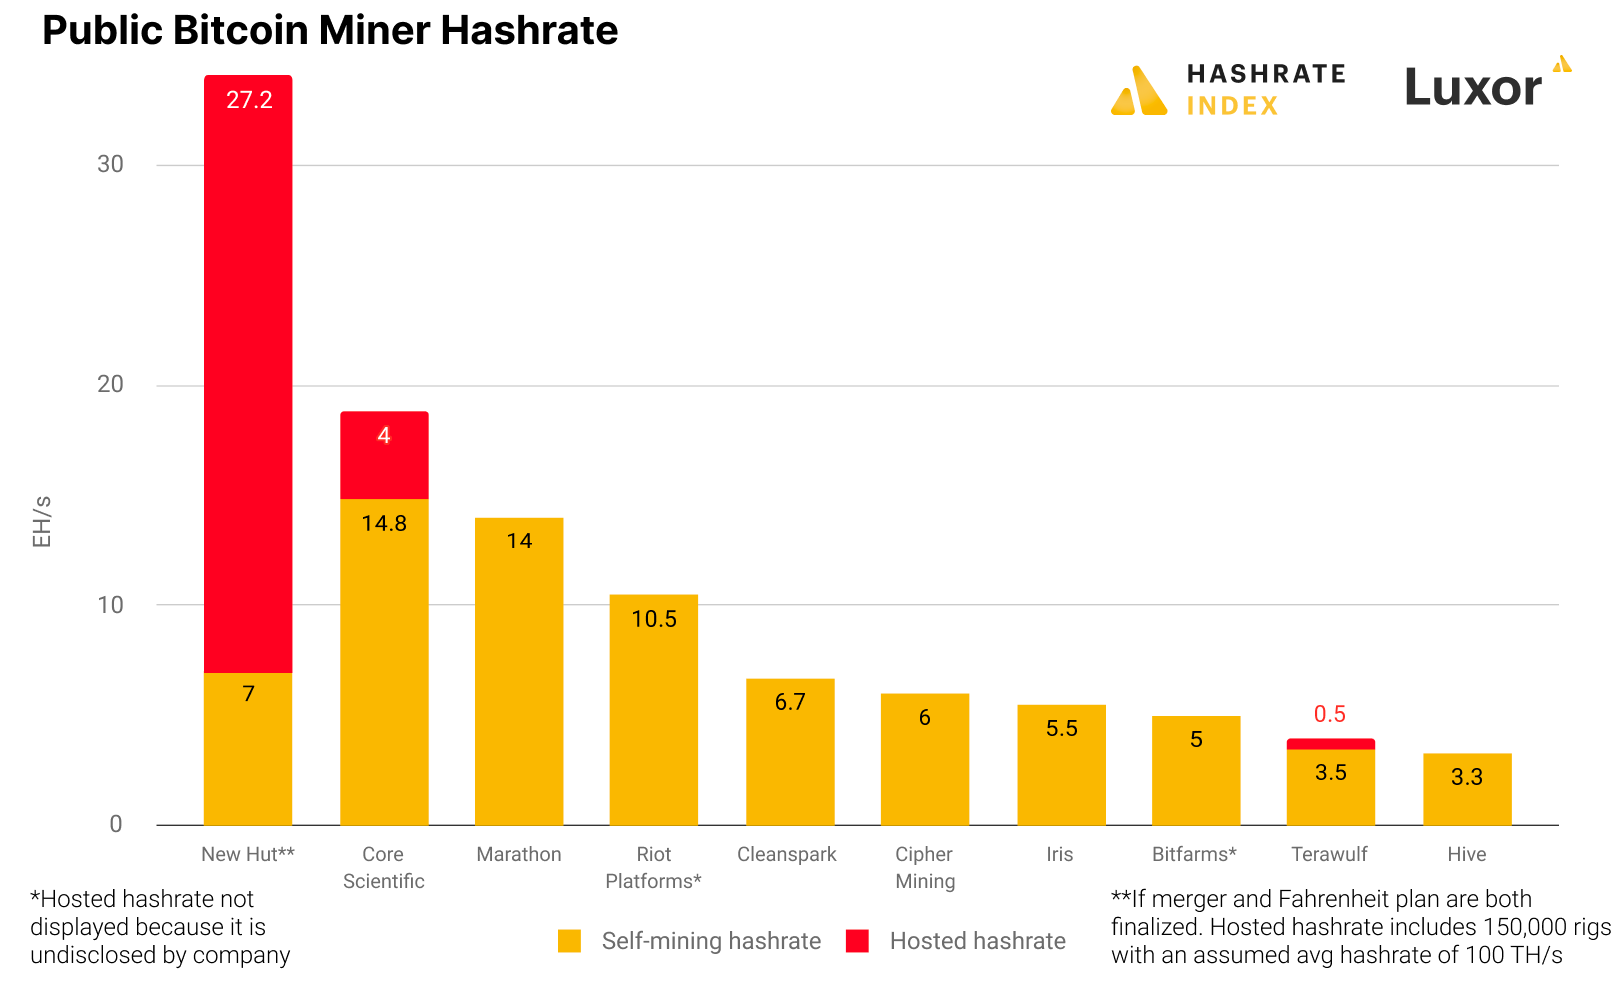 New Hut (Hut 8 and US Bitcoin post merger) would be the largest public Bitcoin miner in the world by hashrate under management